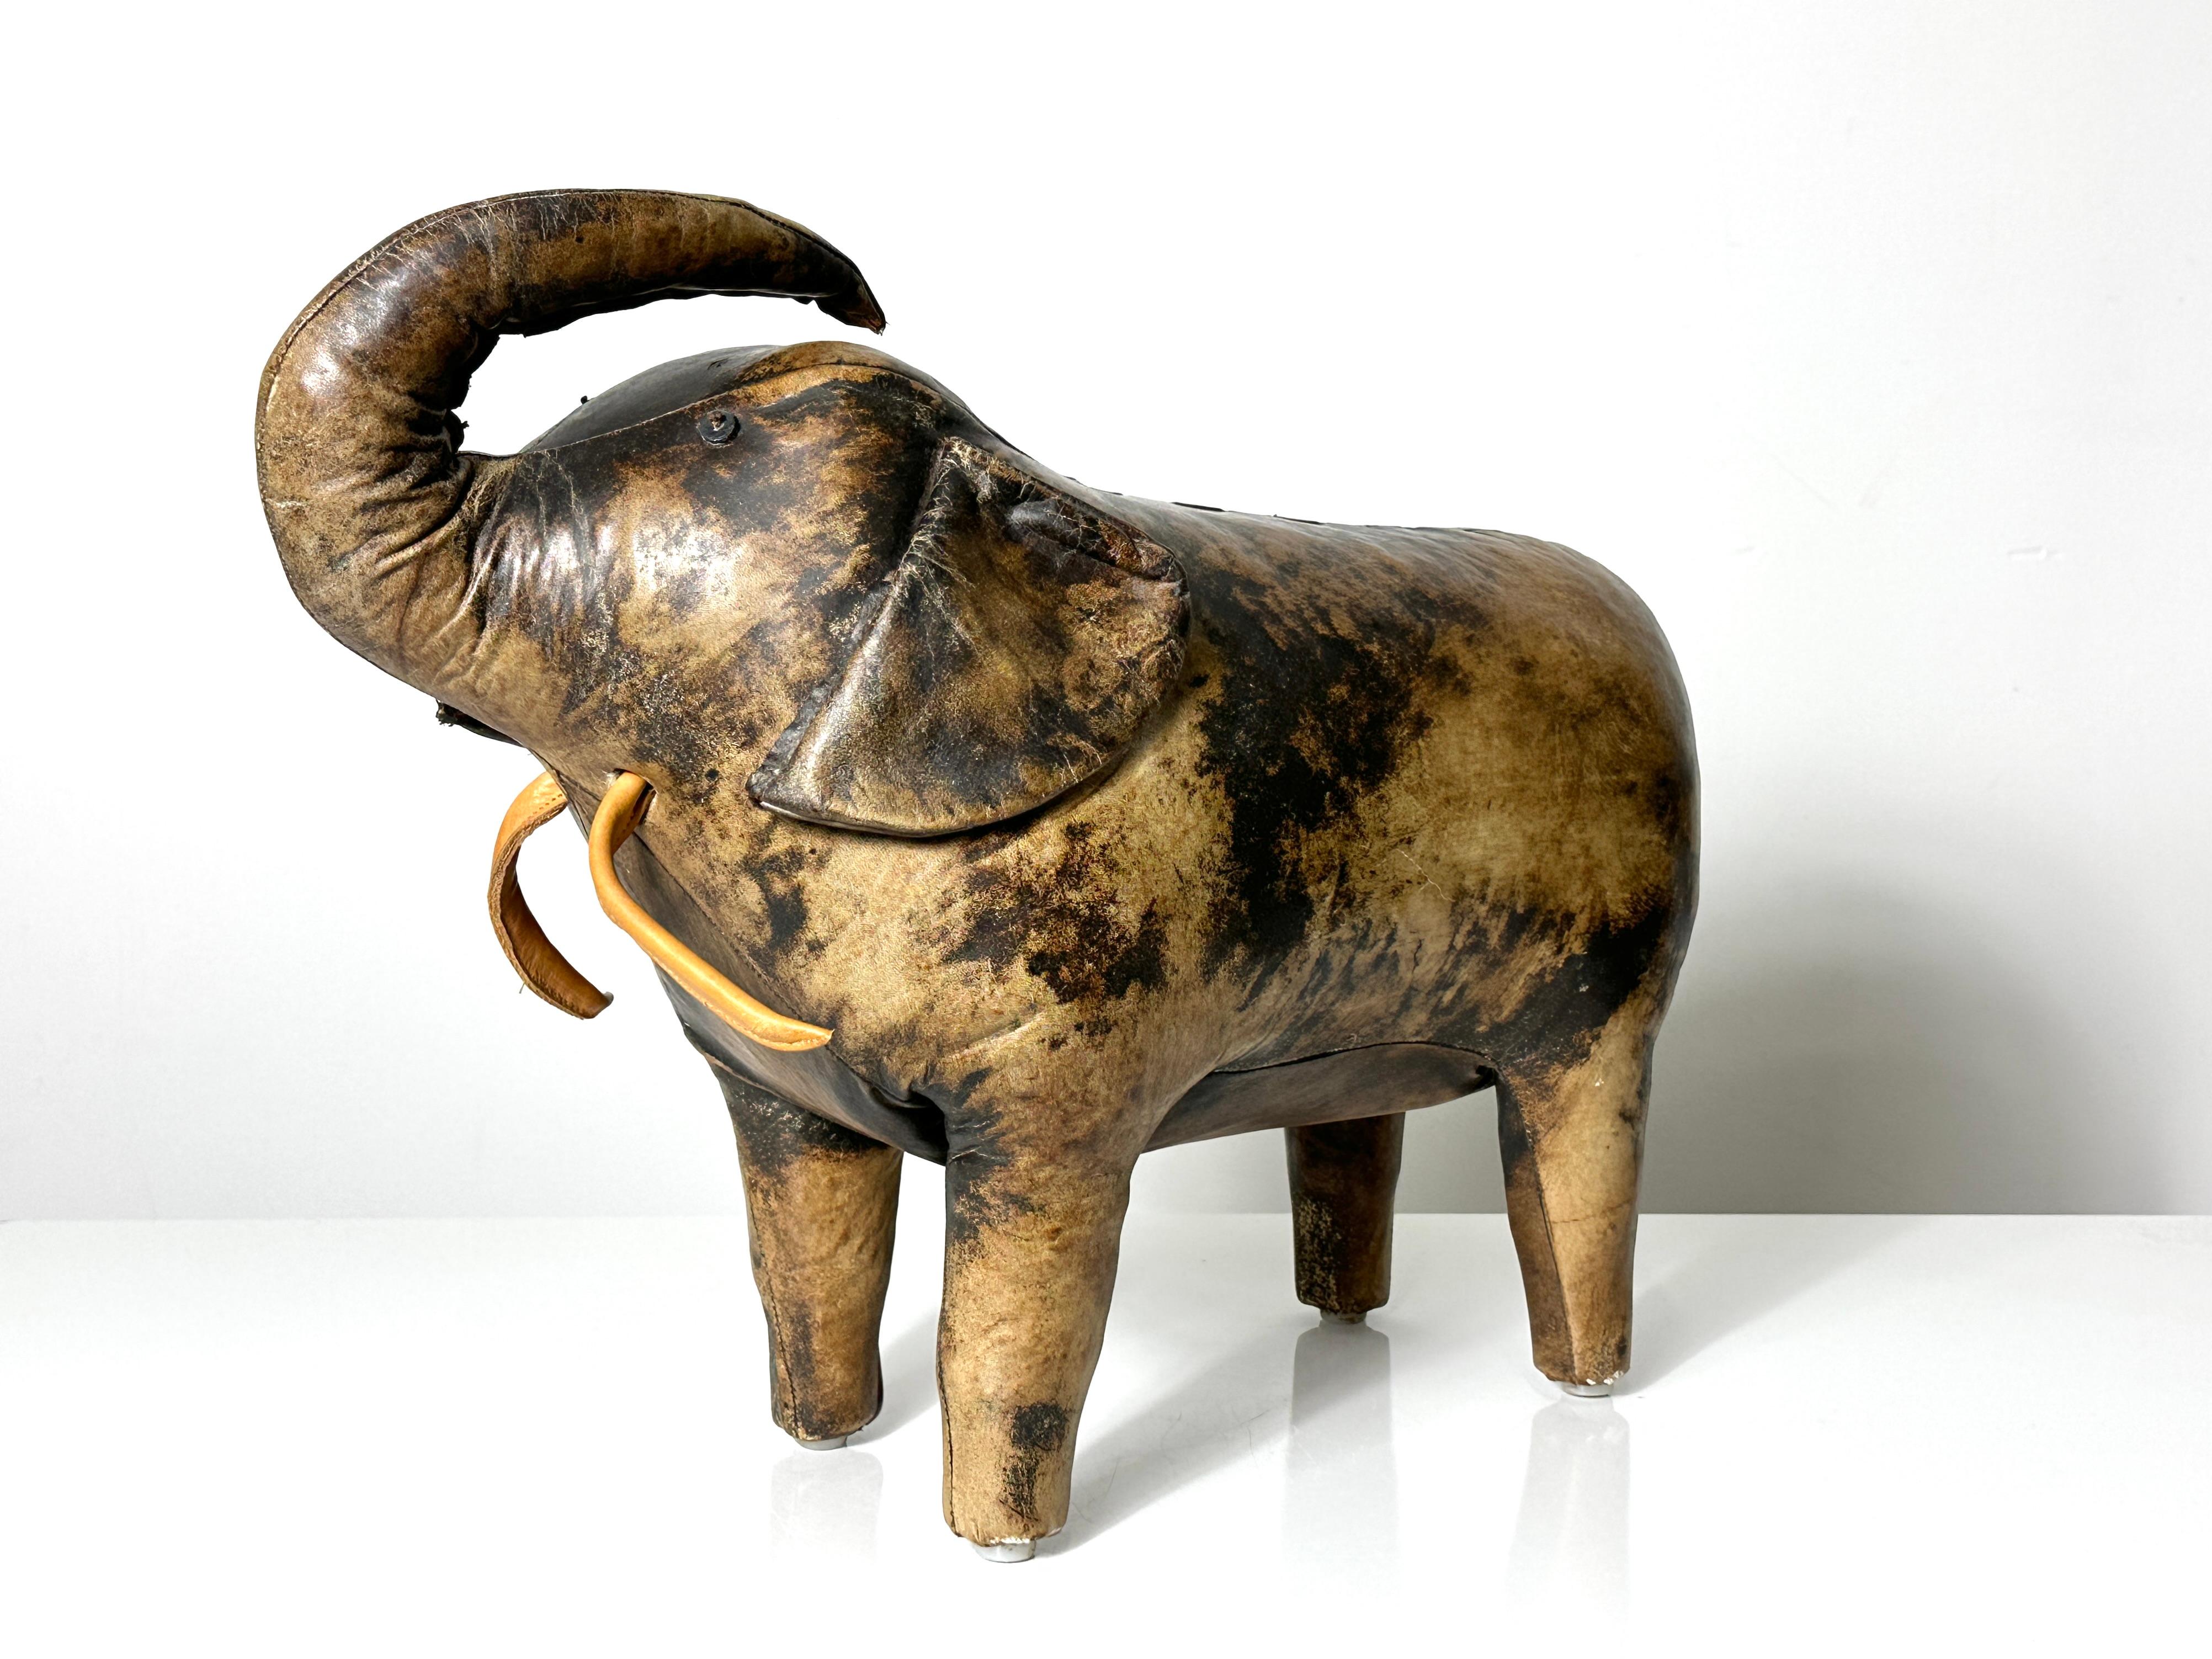 A leather elephant stool by Dimitri Omersa for Abercrombie & Fitch
Circa 1960s - 1970s

Hand stitched leather with floppy ears leather tusks and tassel tail
A unique example with really cool marbling and colors
Unmarked

21 inches wide
10 inches